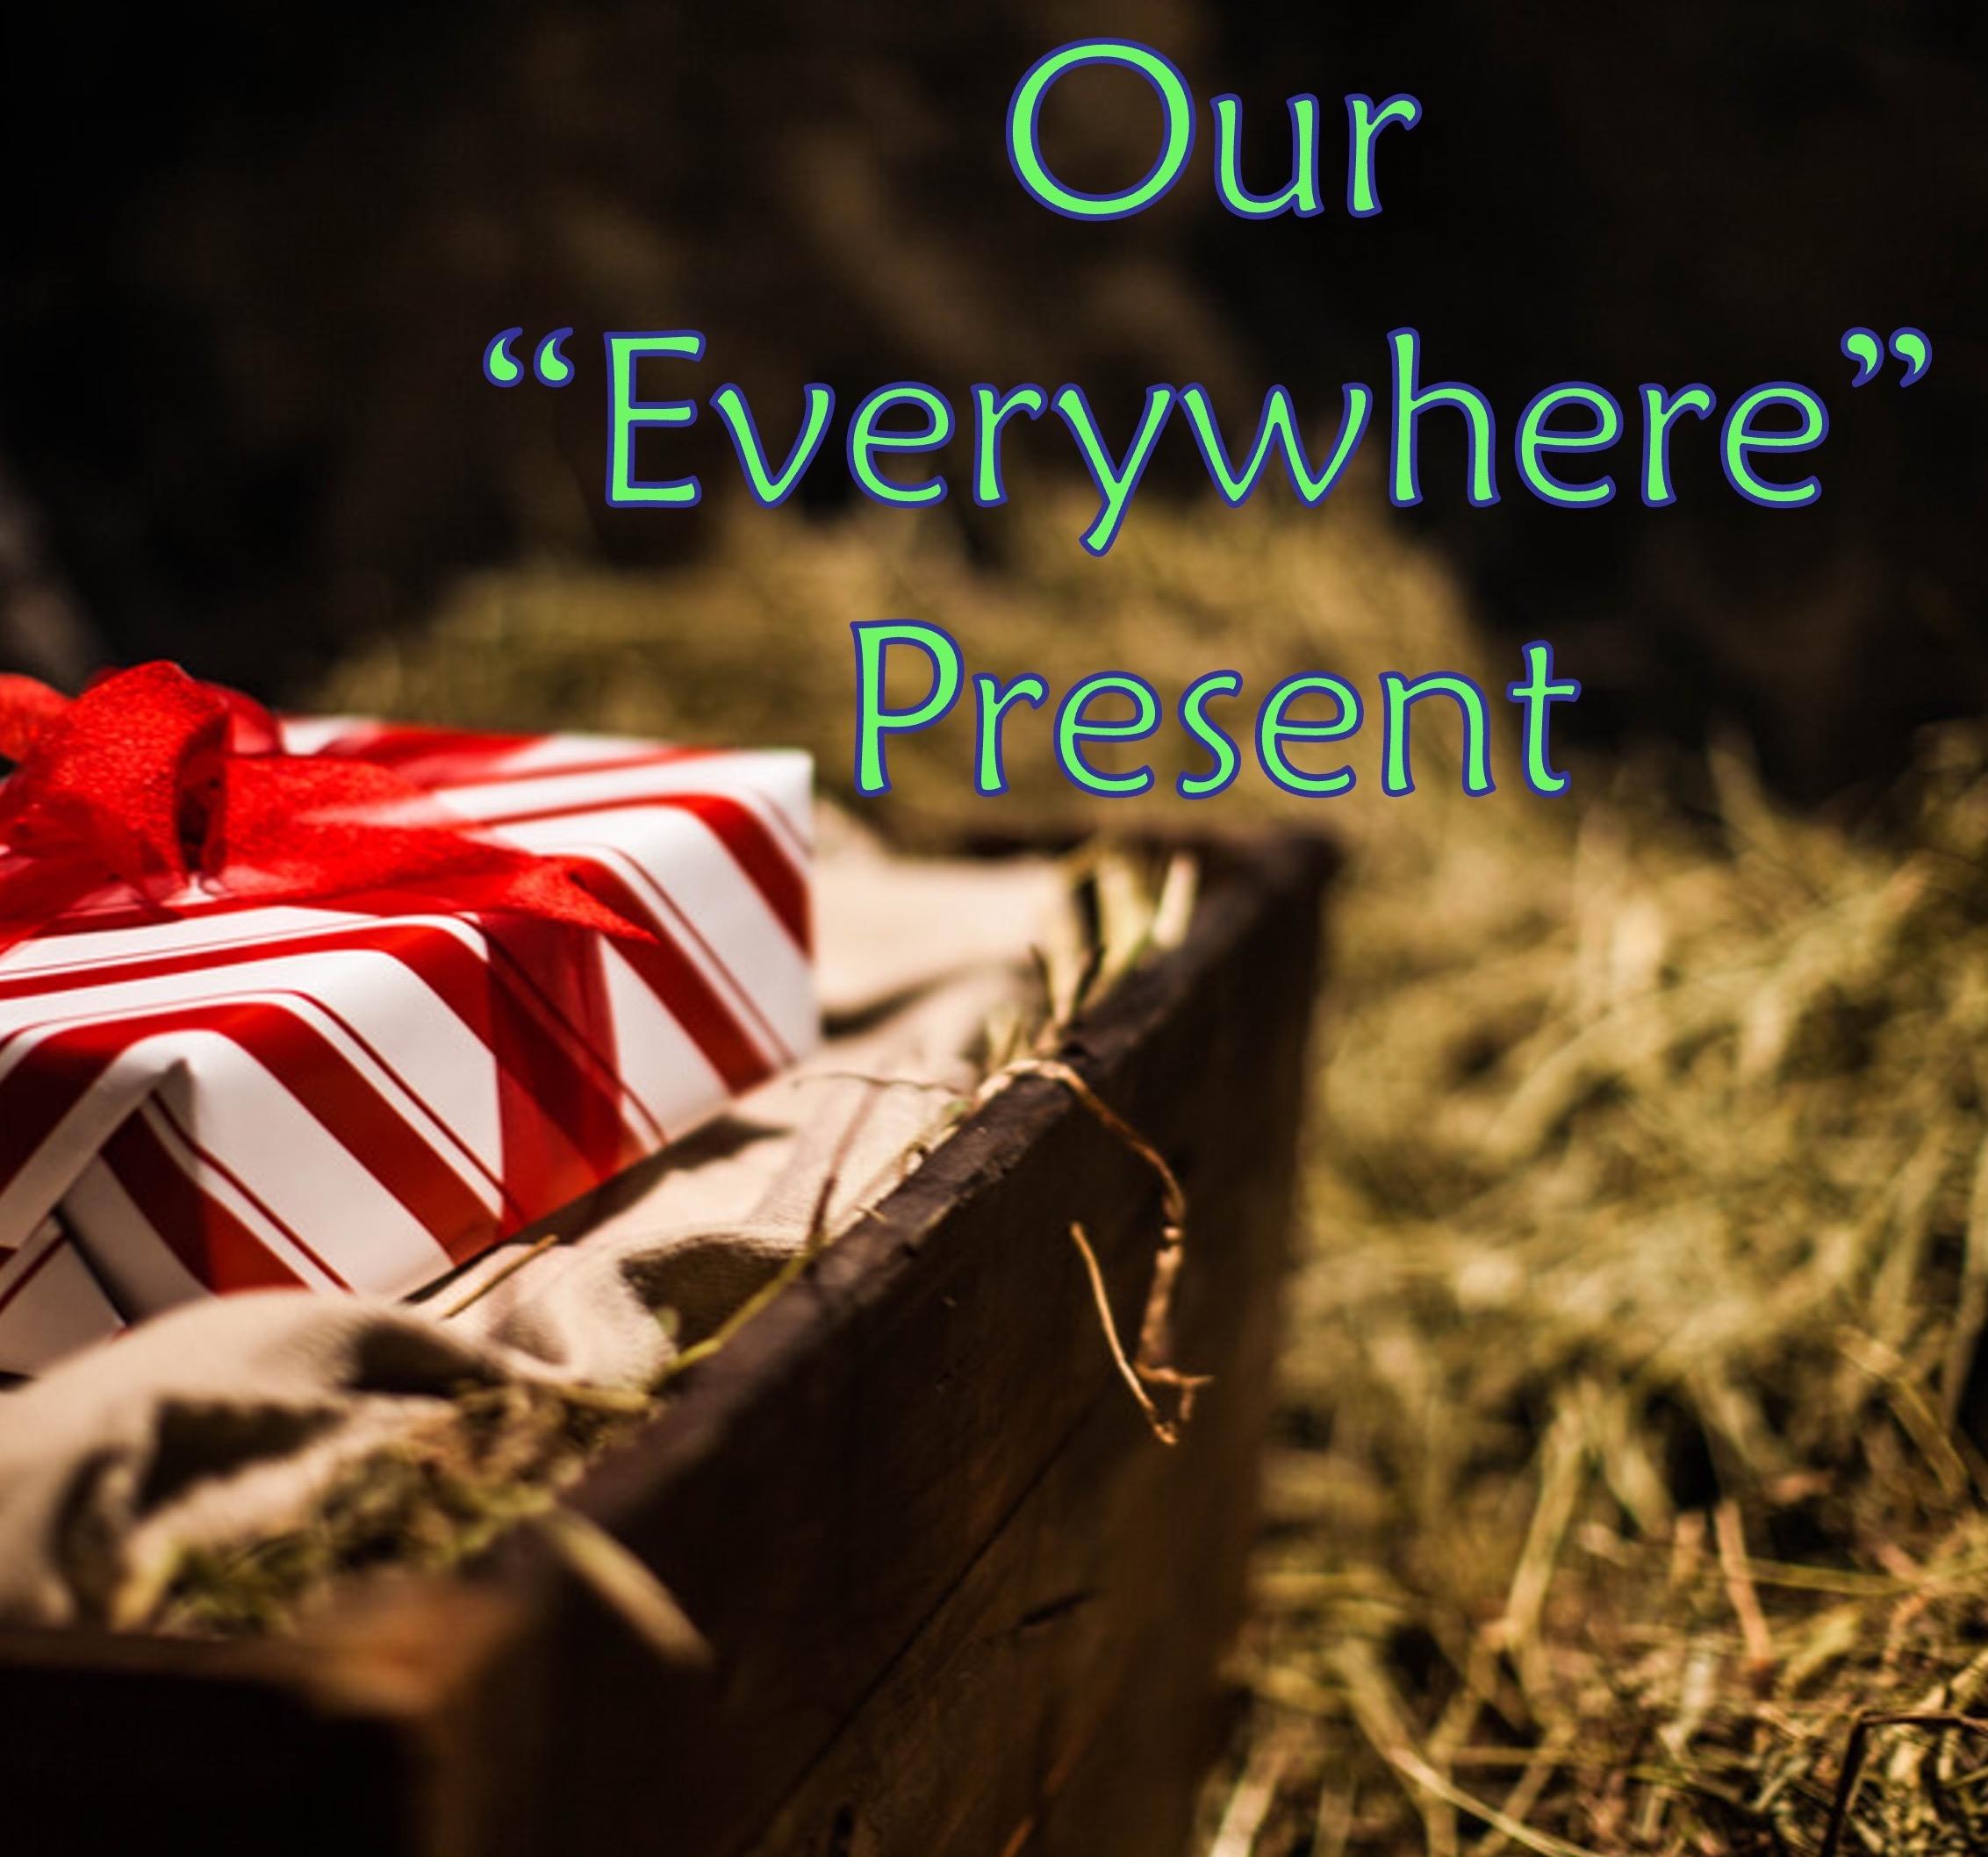 Our “Everywhere” Present